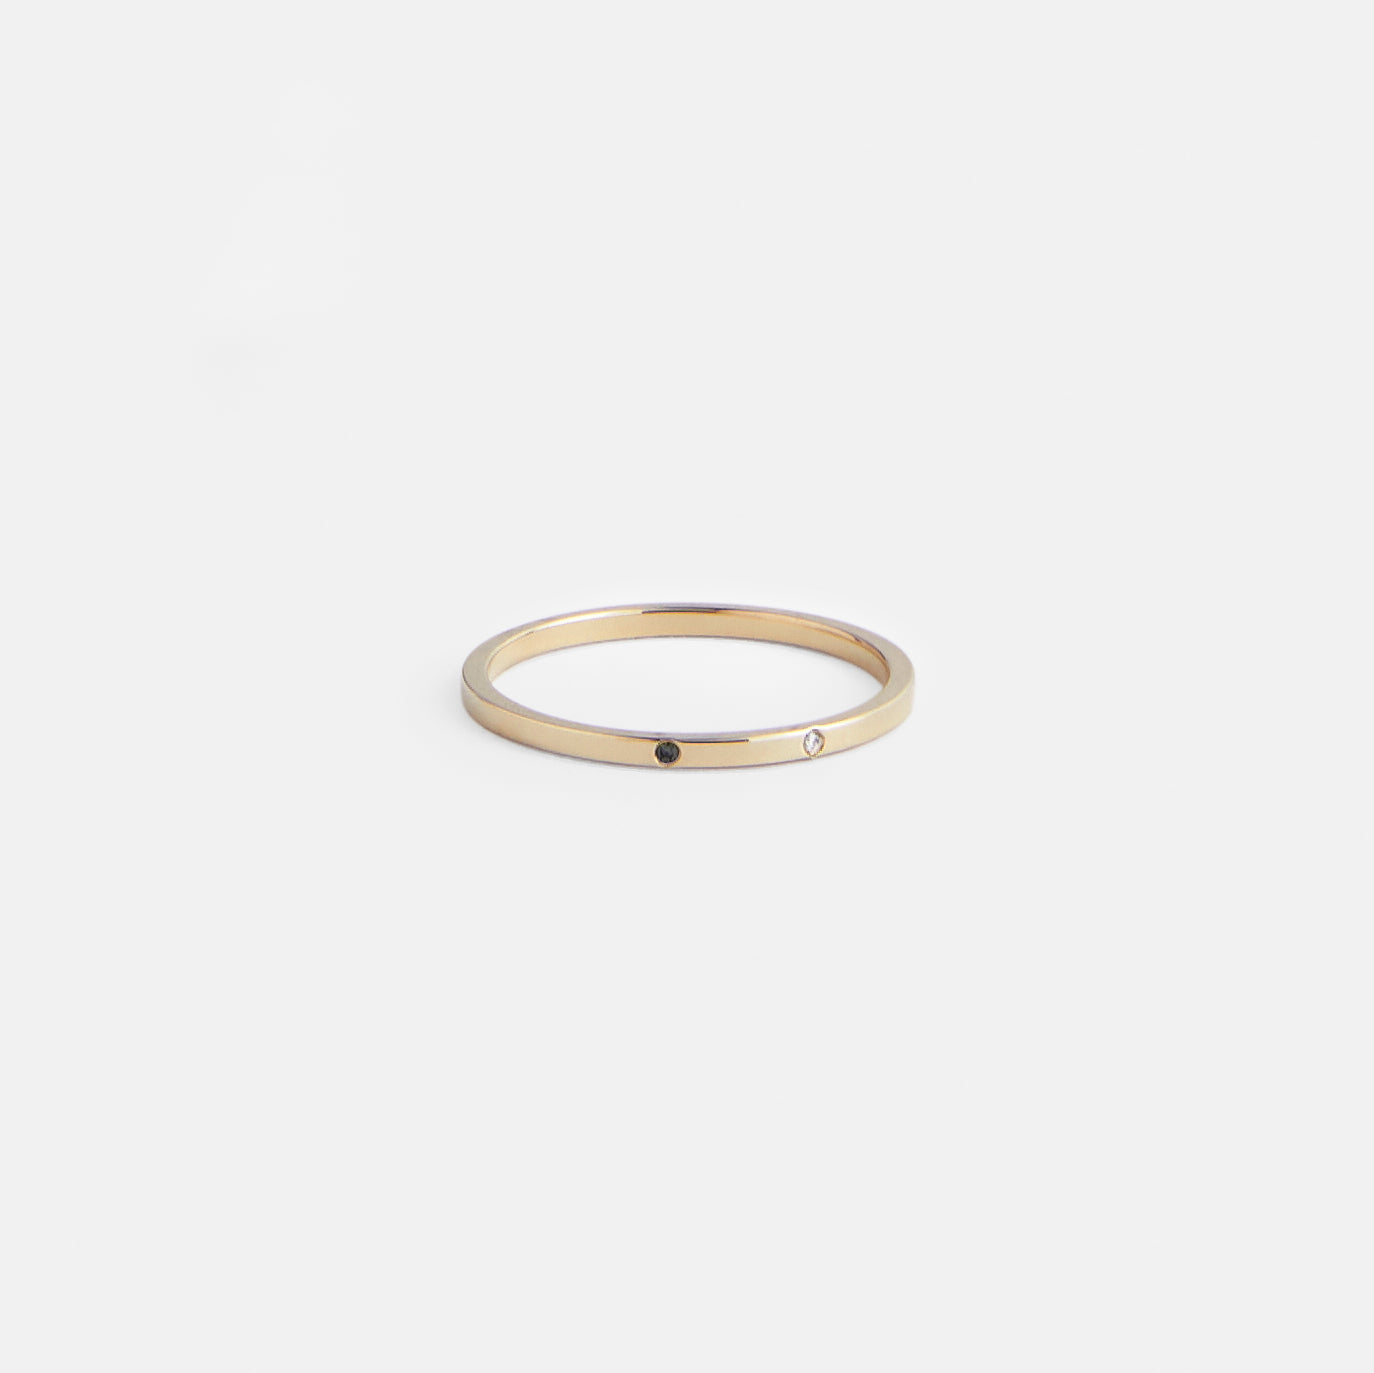 Sarala MInimalist Ring in 14k Gold set with White and Black Diamonds By SHW Fine Jewelry New York City